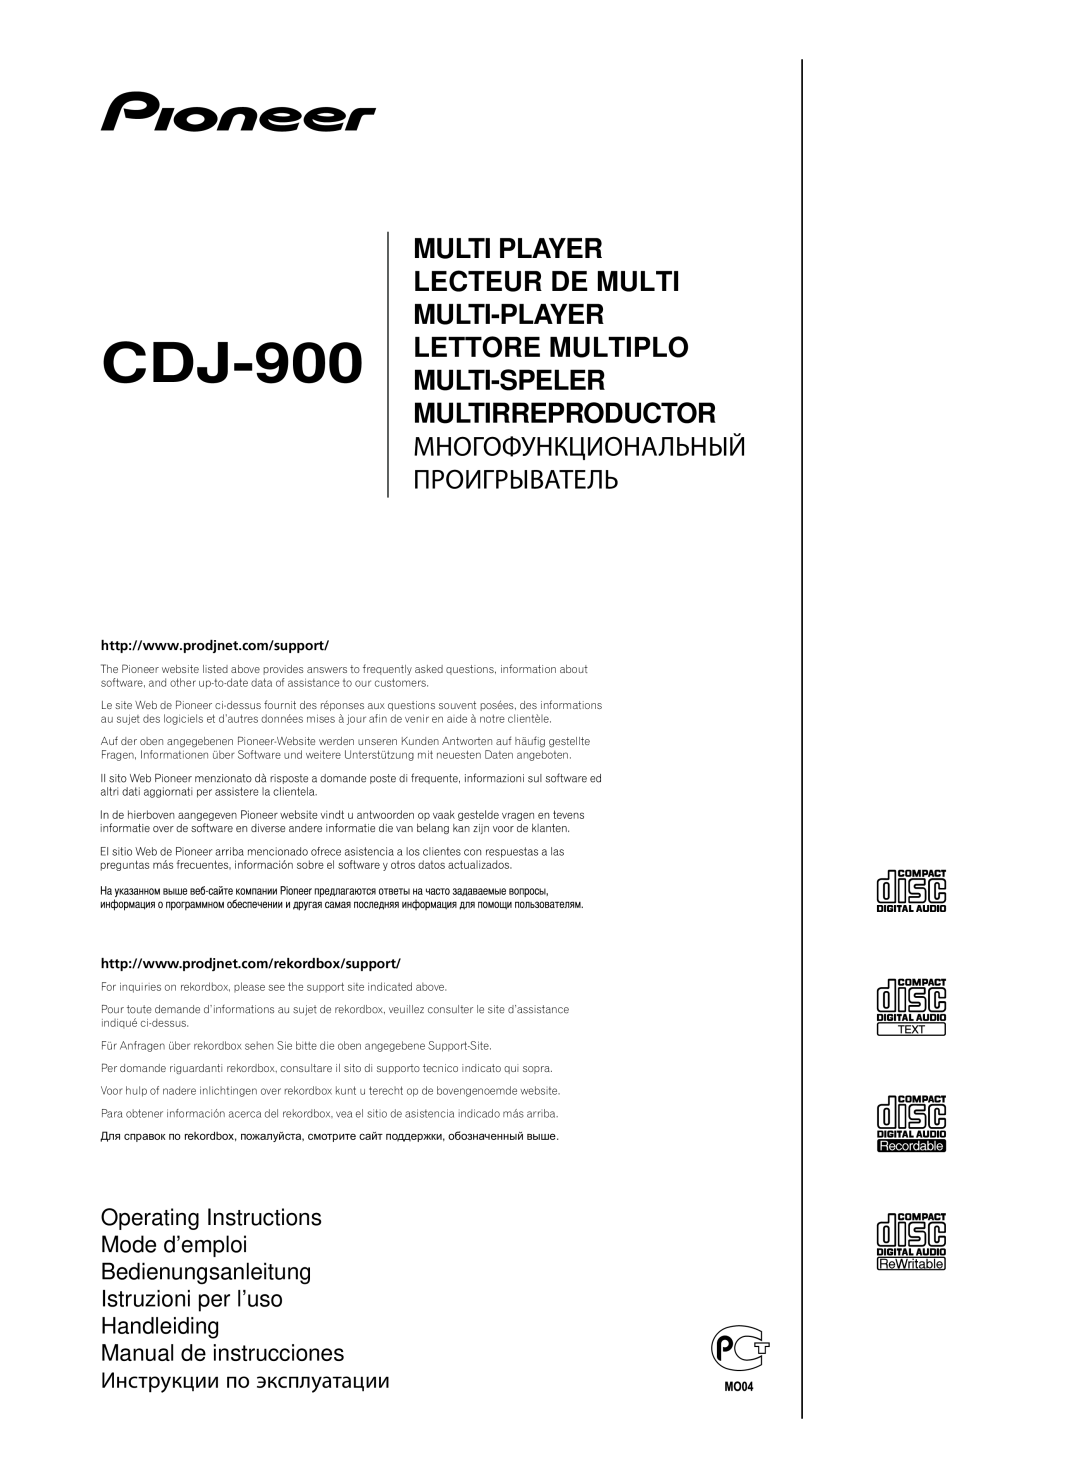 Pioneer Multi Player operating instructions CDJ-900, Operating Instructions Mode d’emploi, Handleiding 